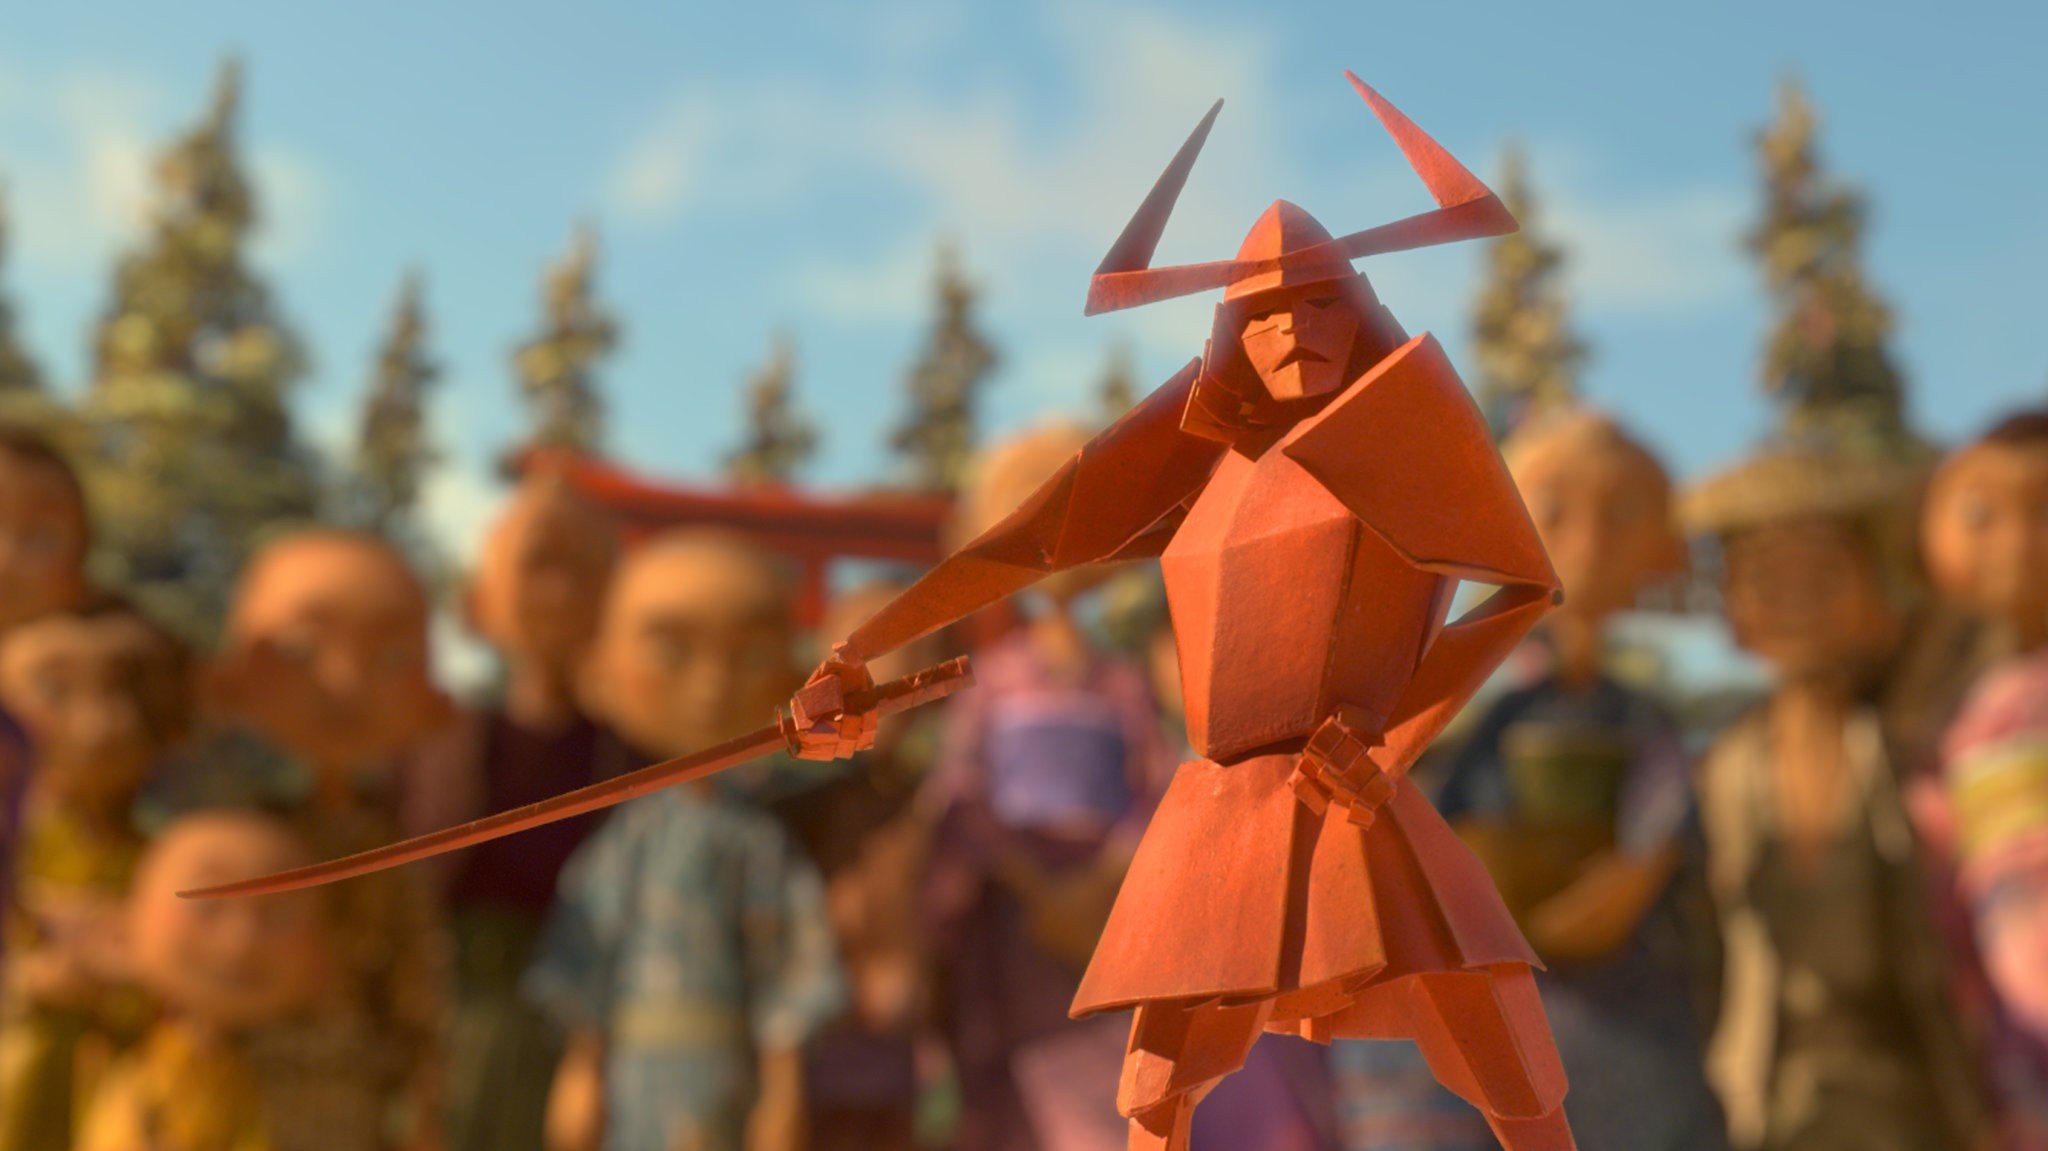 kubo and the two strings, Samurai, Origami Wallpaper